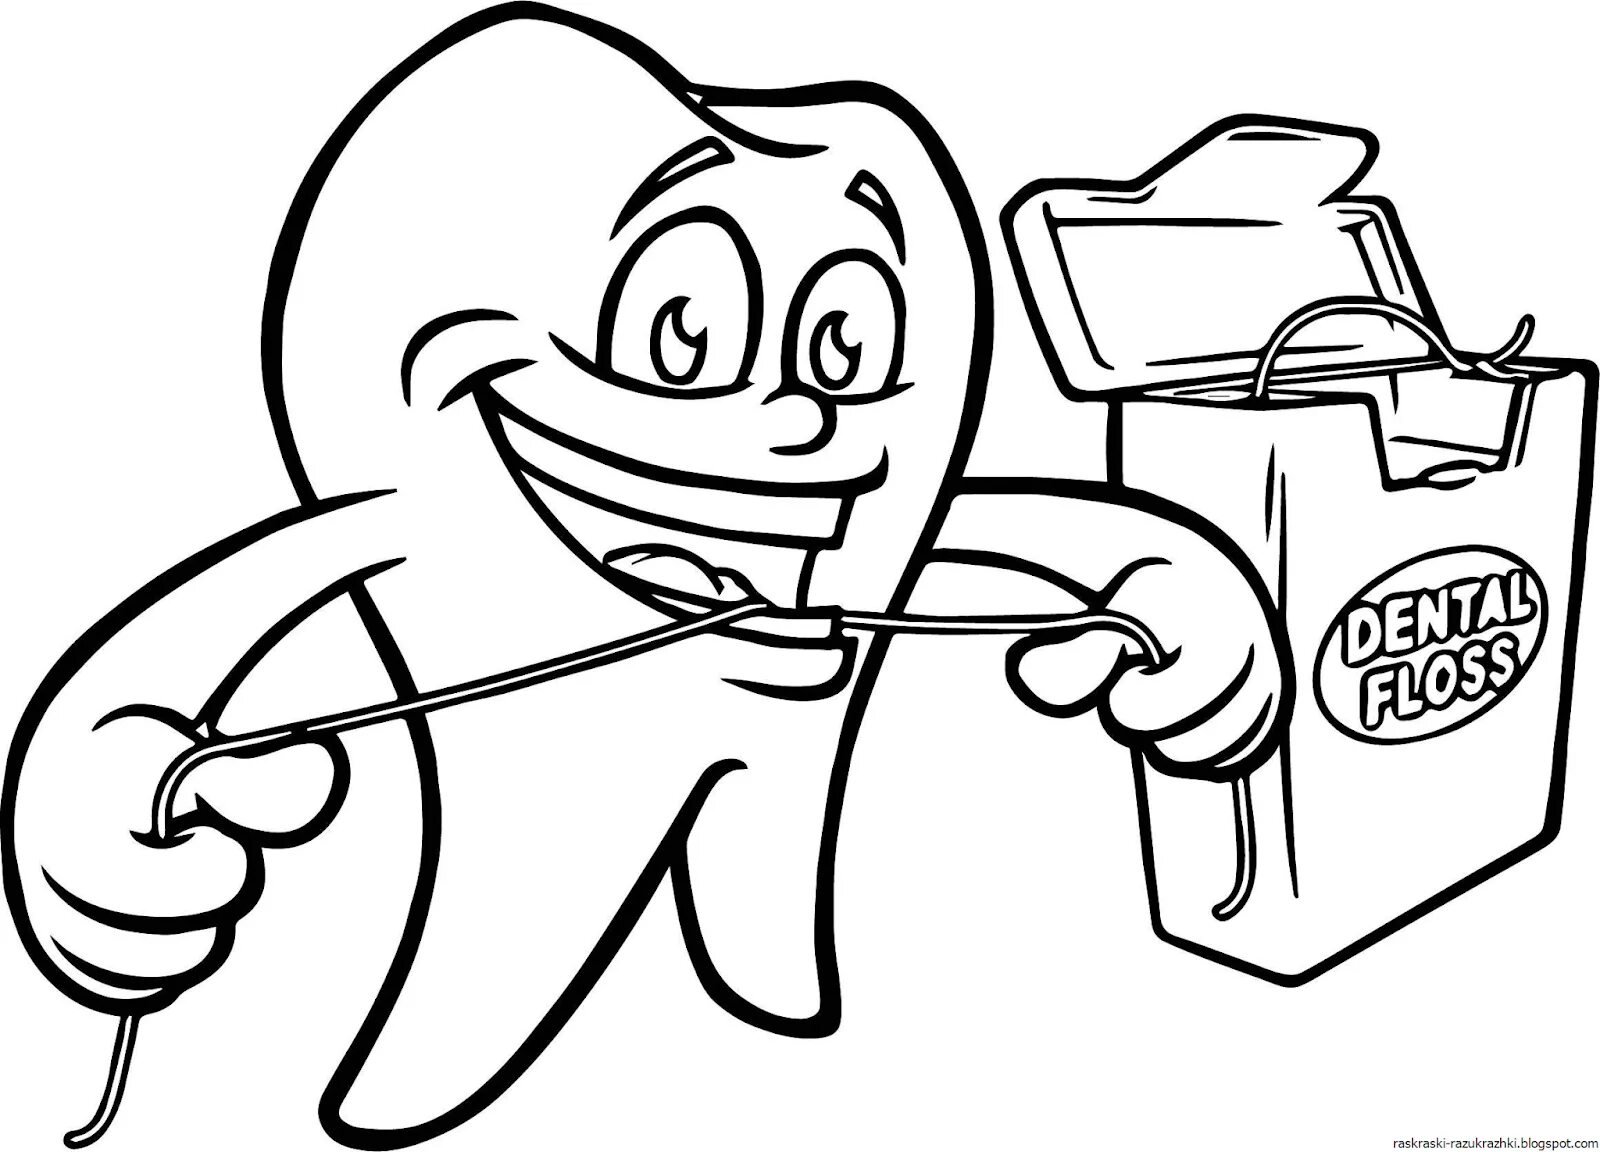 Color-lively dentistry coloring book